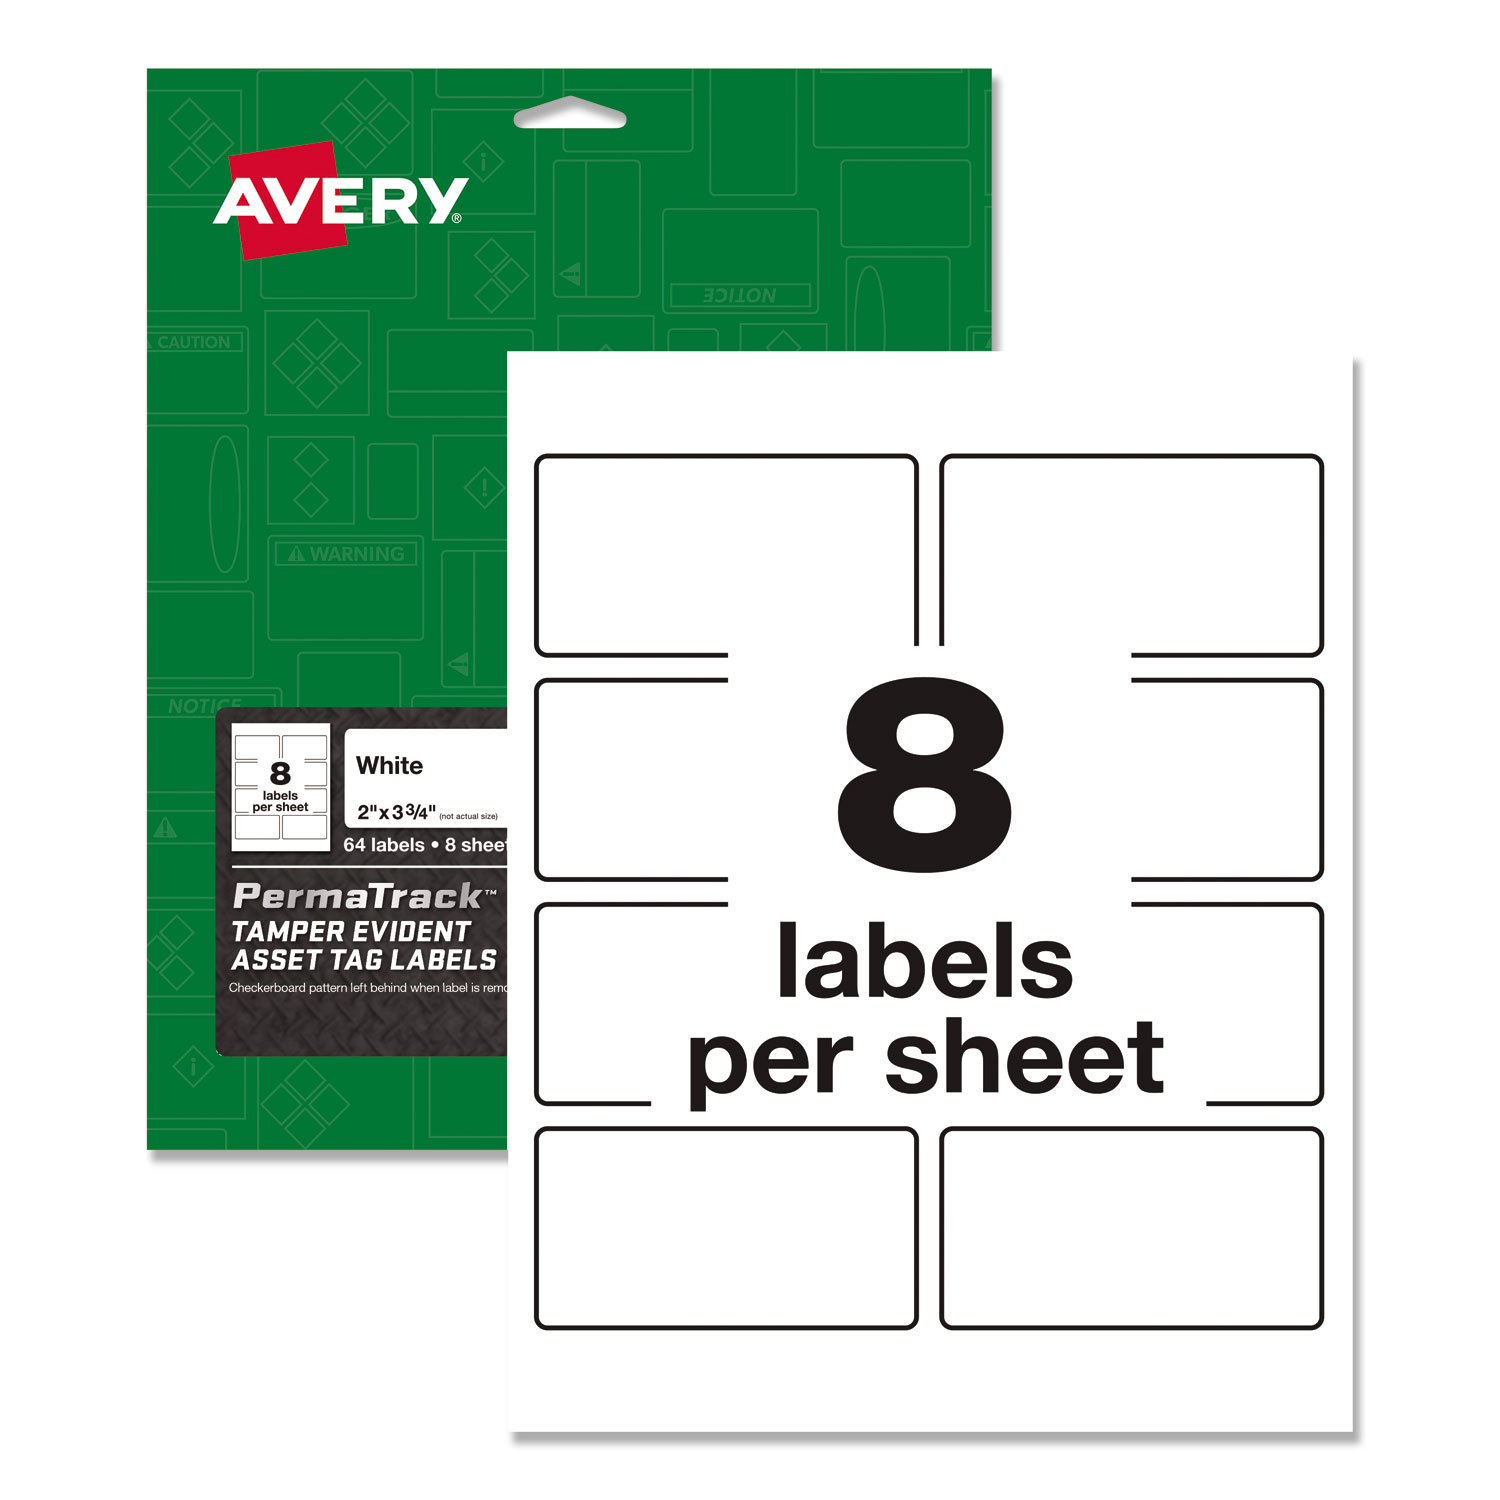  Avery 60538 PermaTrack Tamper-Evident Asset Tag Labels, Laser Printers, 2 x 3.75, White, 8/Sheet, 8 Sheets/Pack (AVE60538) 